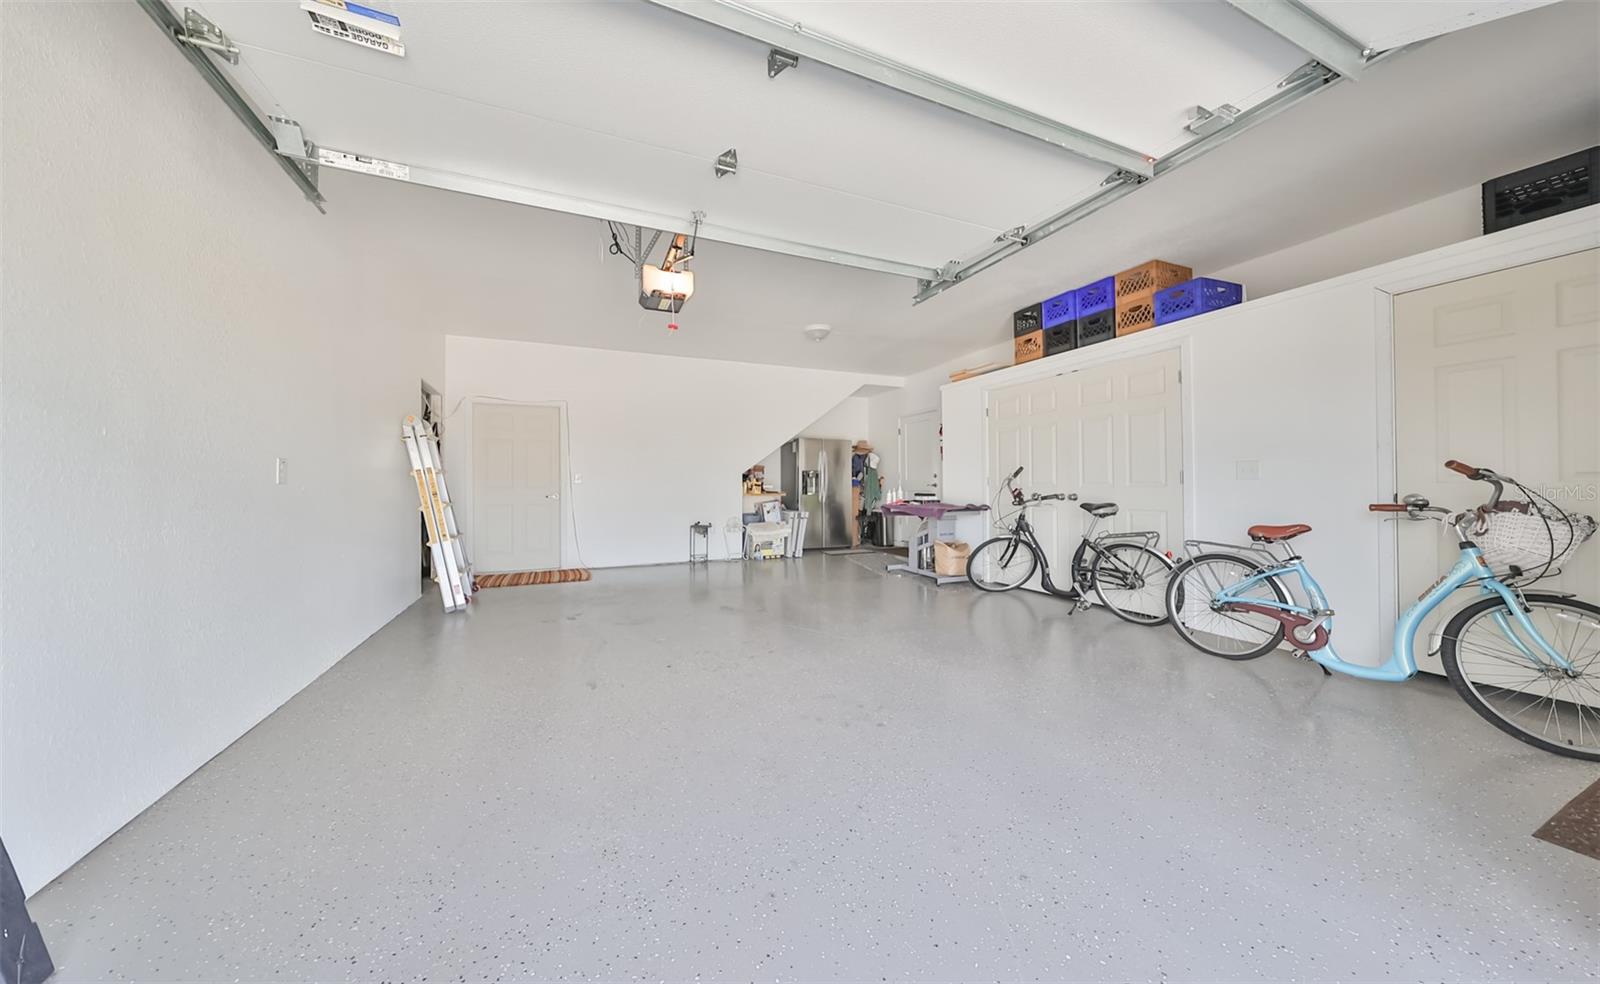 This oversized one car garage has epoxy floors and includes dual double door utility closets for extra storage both downstairs and upstairs, in the indoor insulated walk-up staired attic space as well.